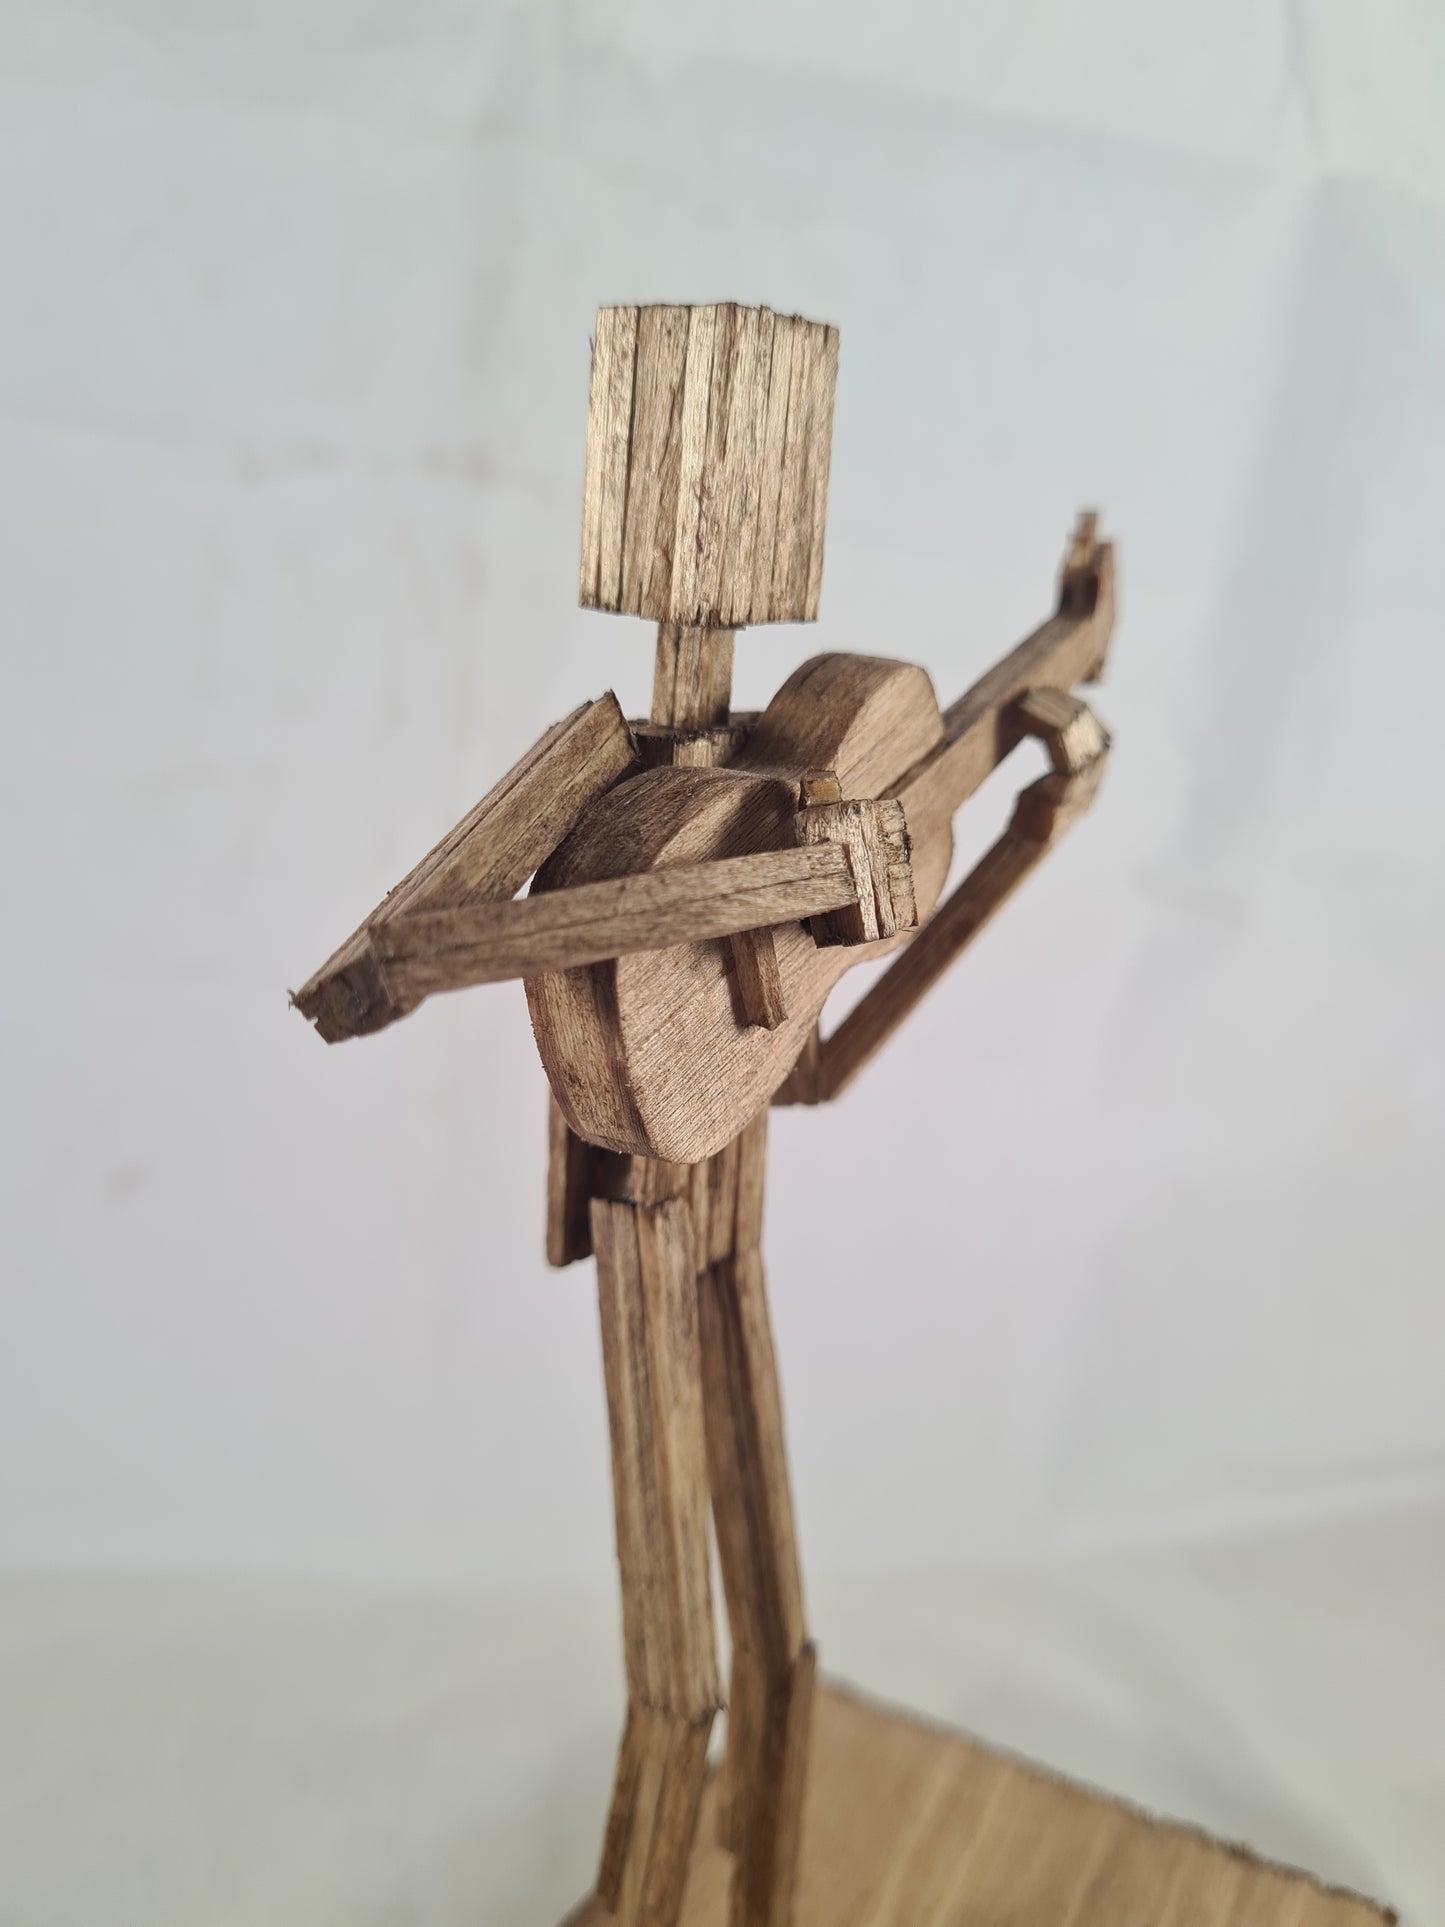 You can Ukulele too! - Handcrafted Wooden Matchstick Figures - Gifts, Ornaments and Decor By Tiggidy Designs